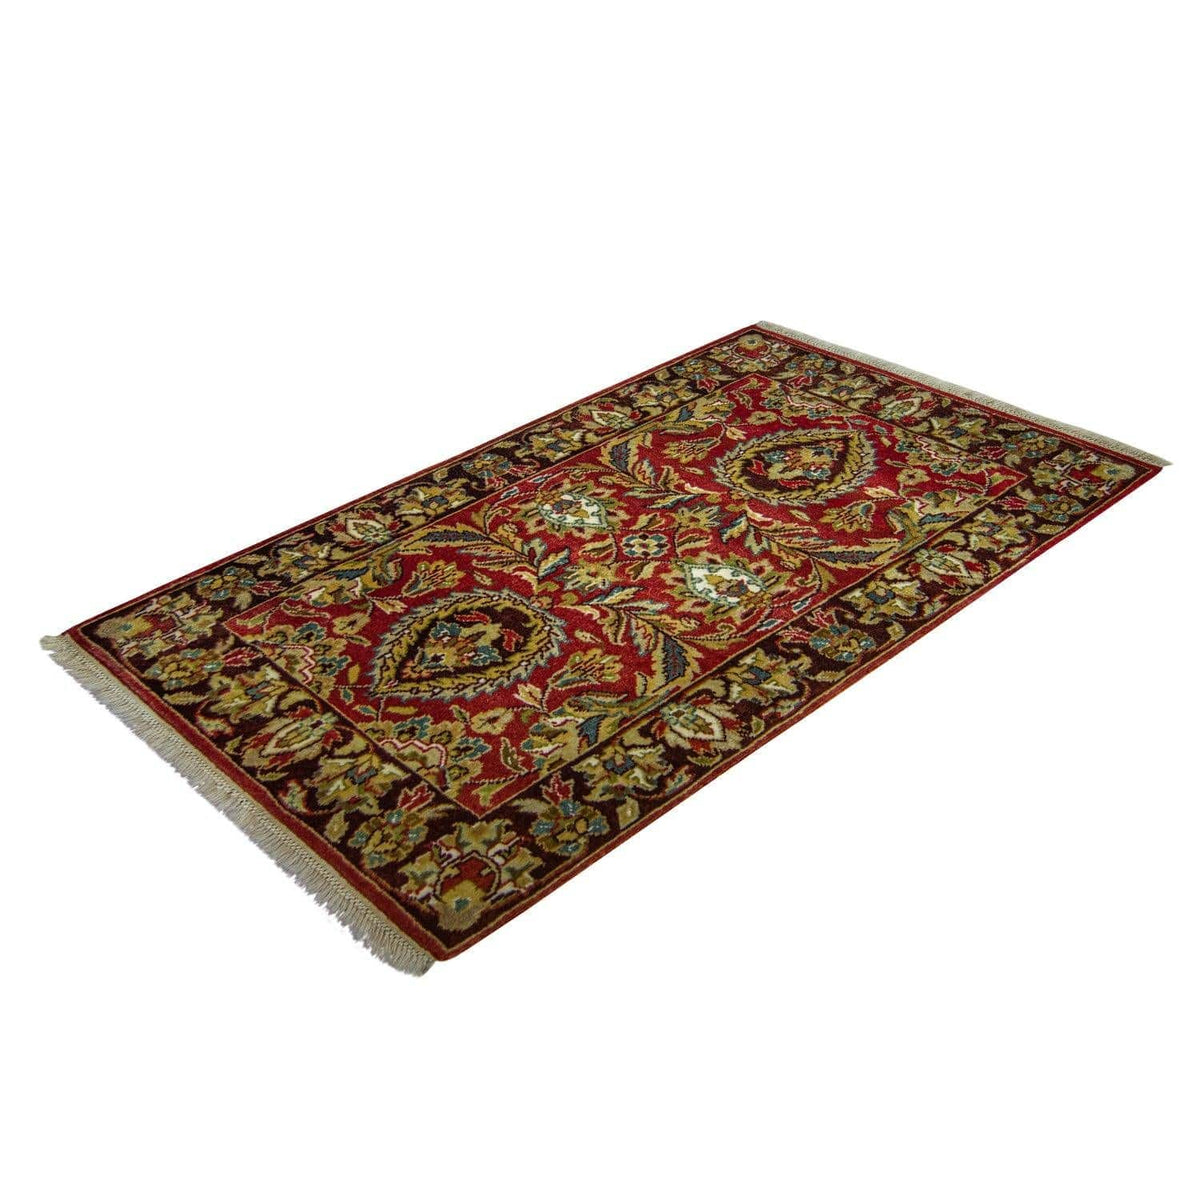 Fine Hand-knotted Floral Design Small Rug 67cm x 100cm